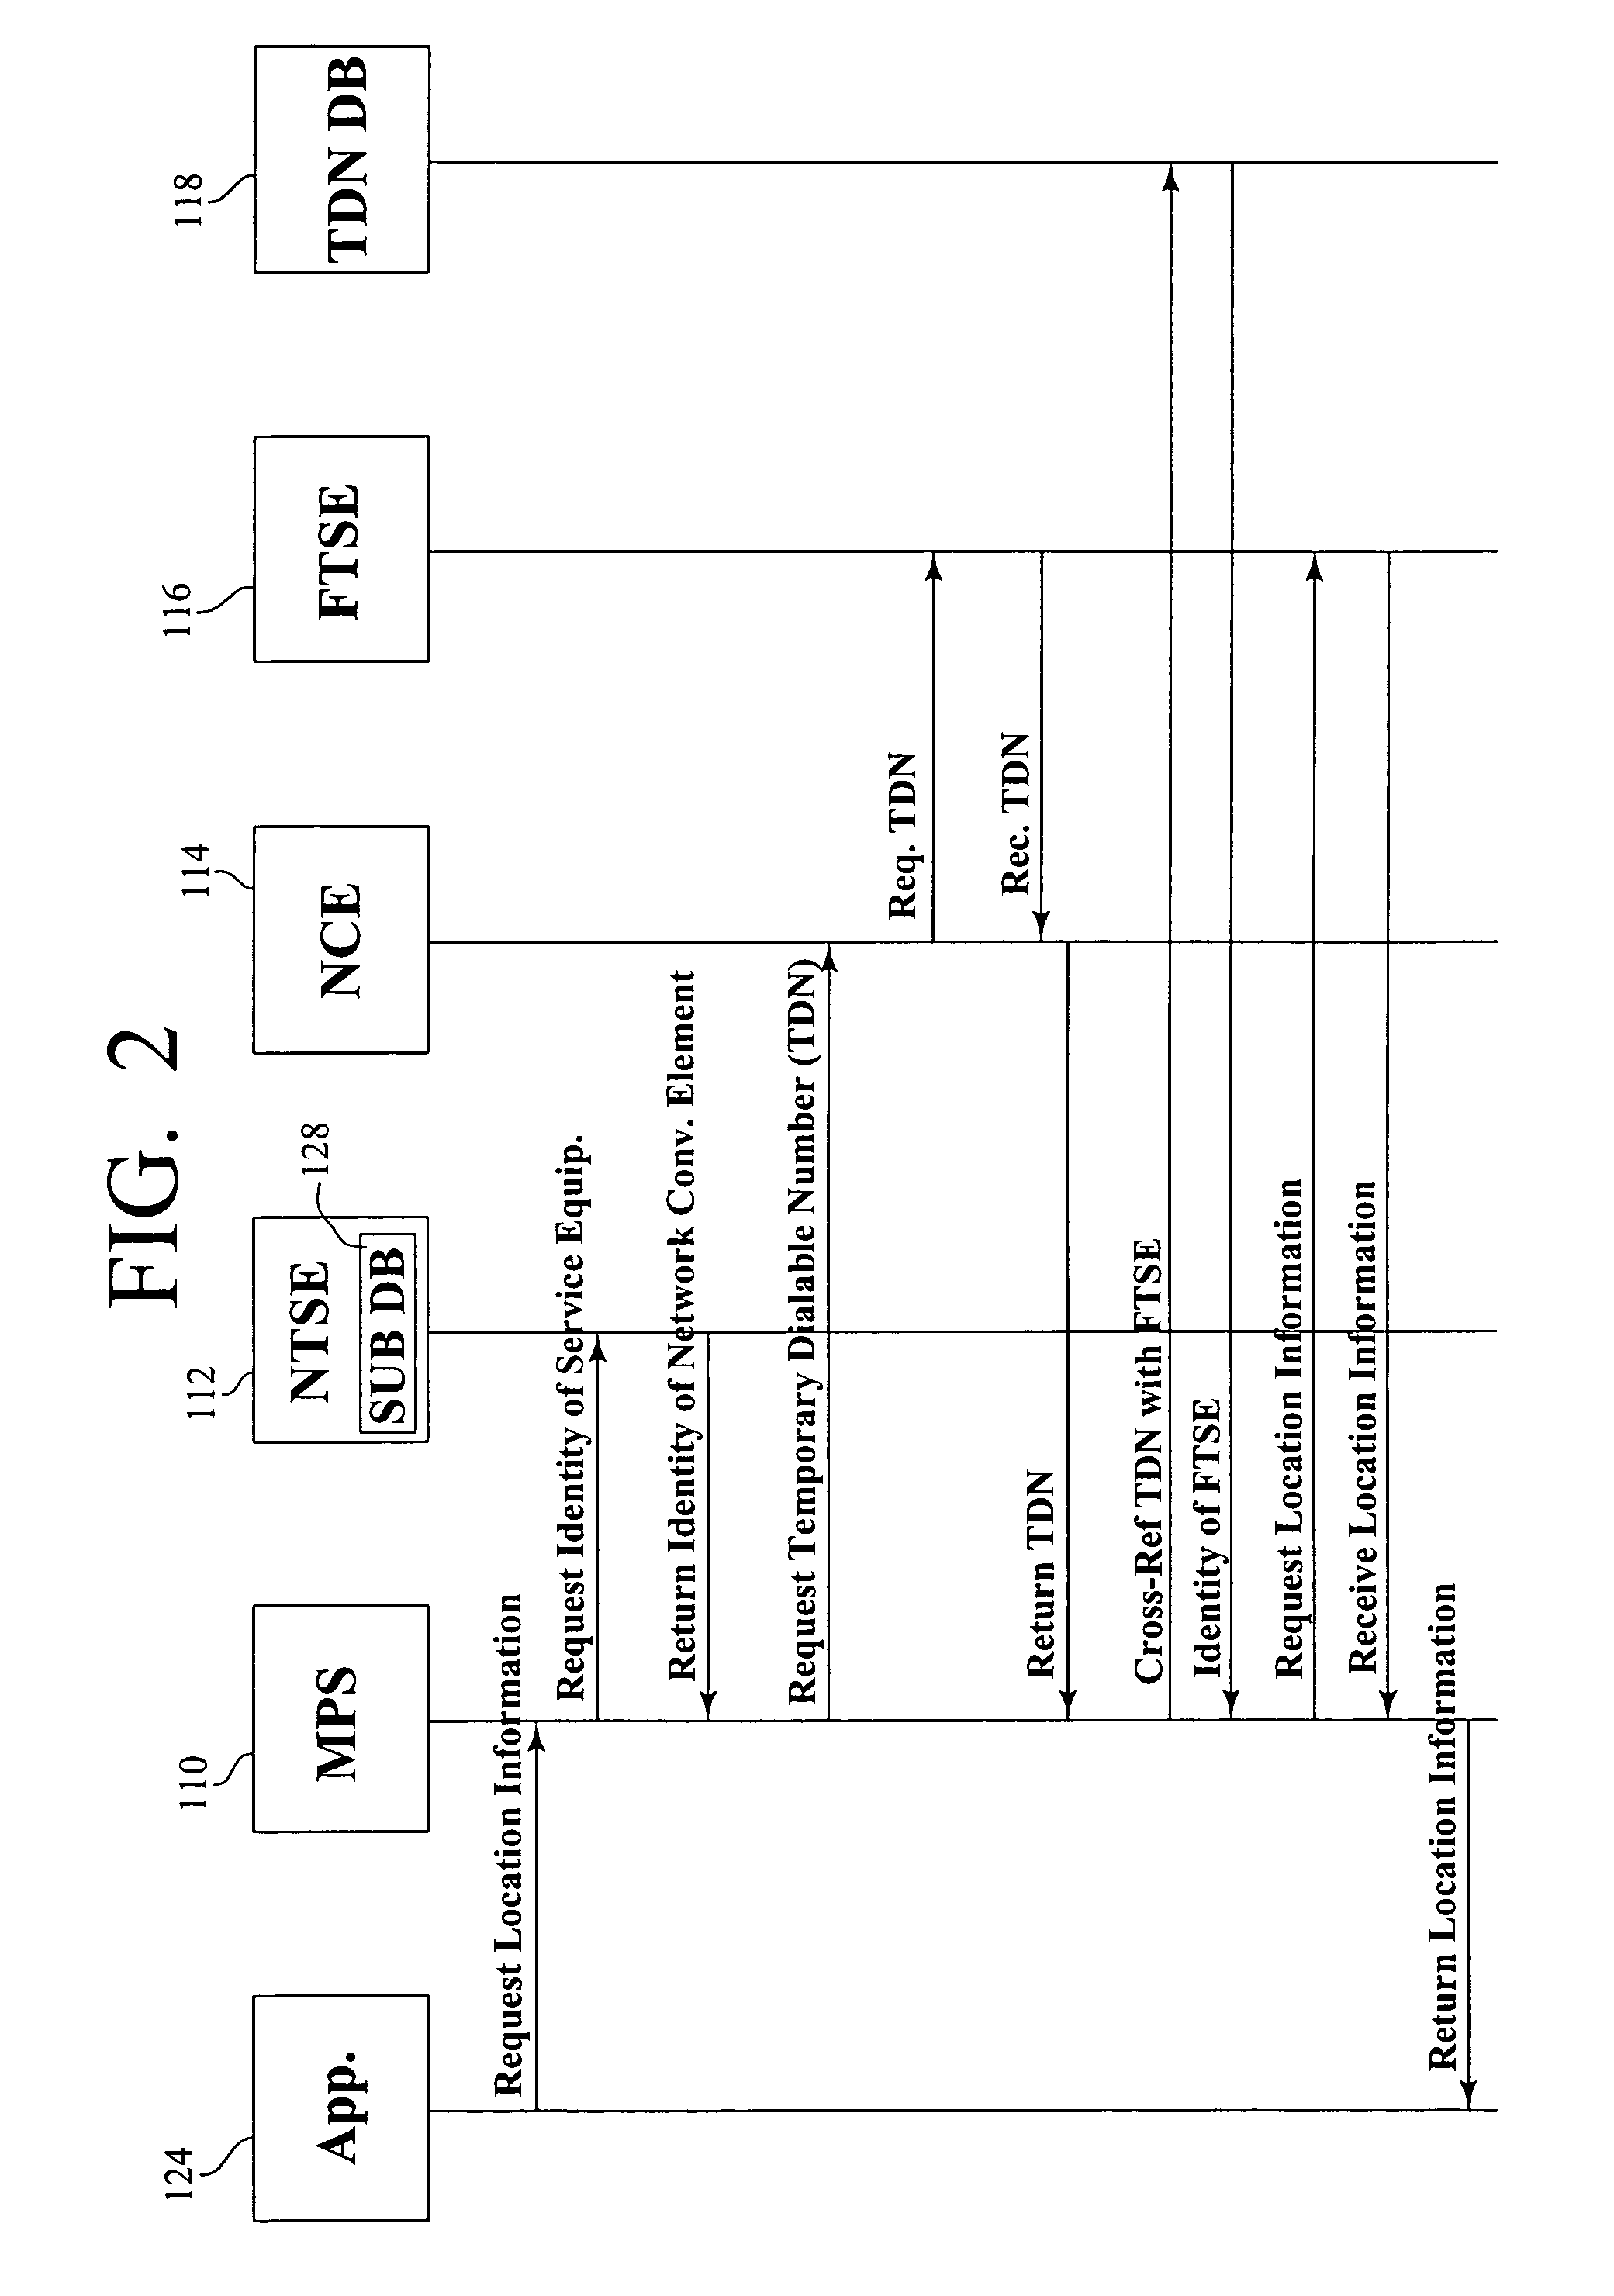 Location-based services for a multi-technology wireless device operating in a foreign technology mode